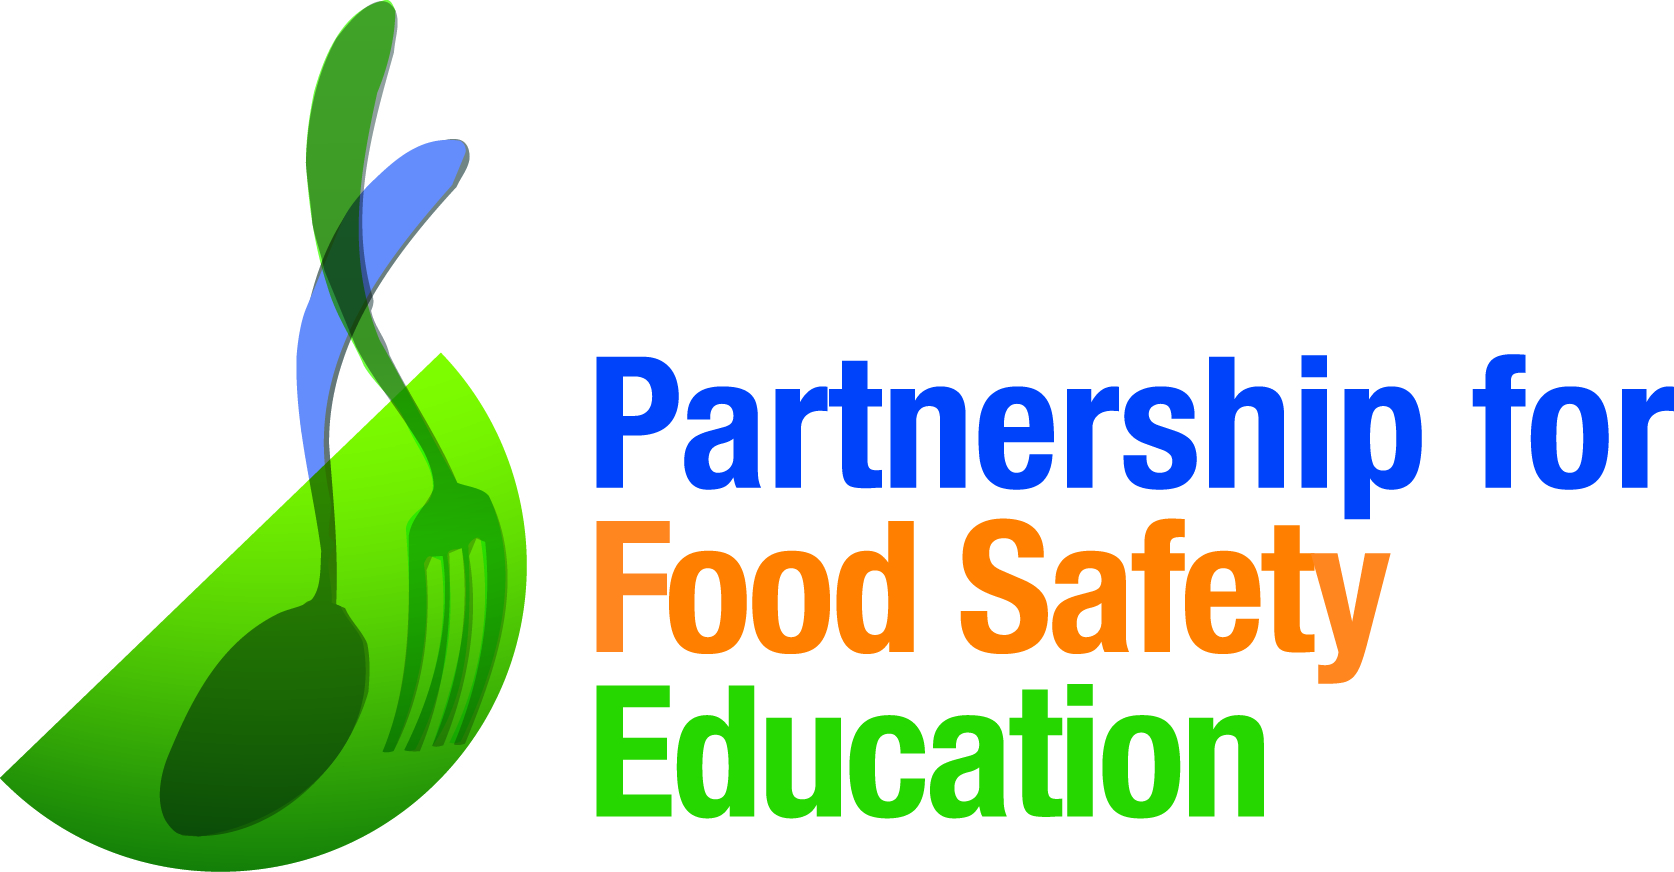 The Partnership for Food Safety Education Logo